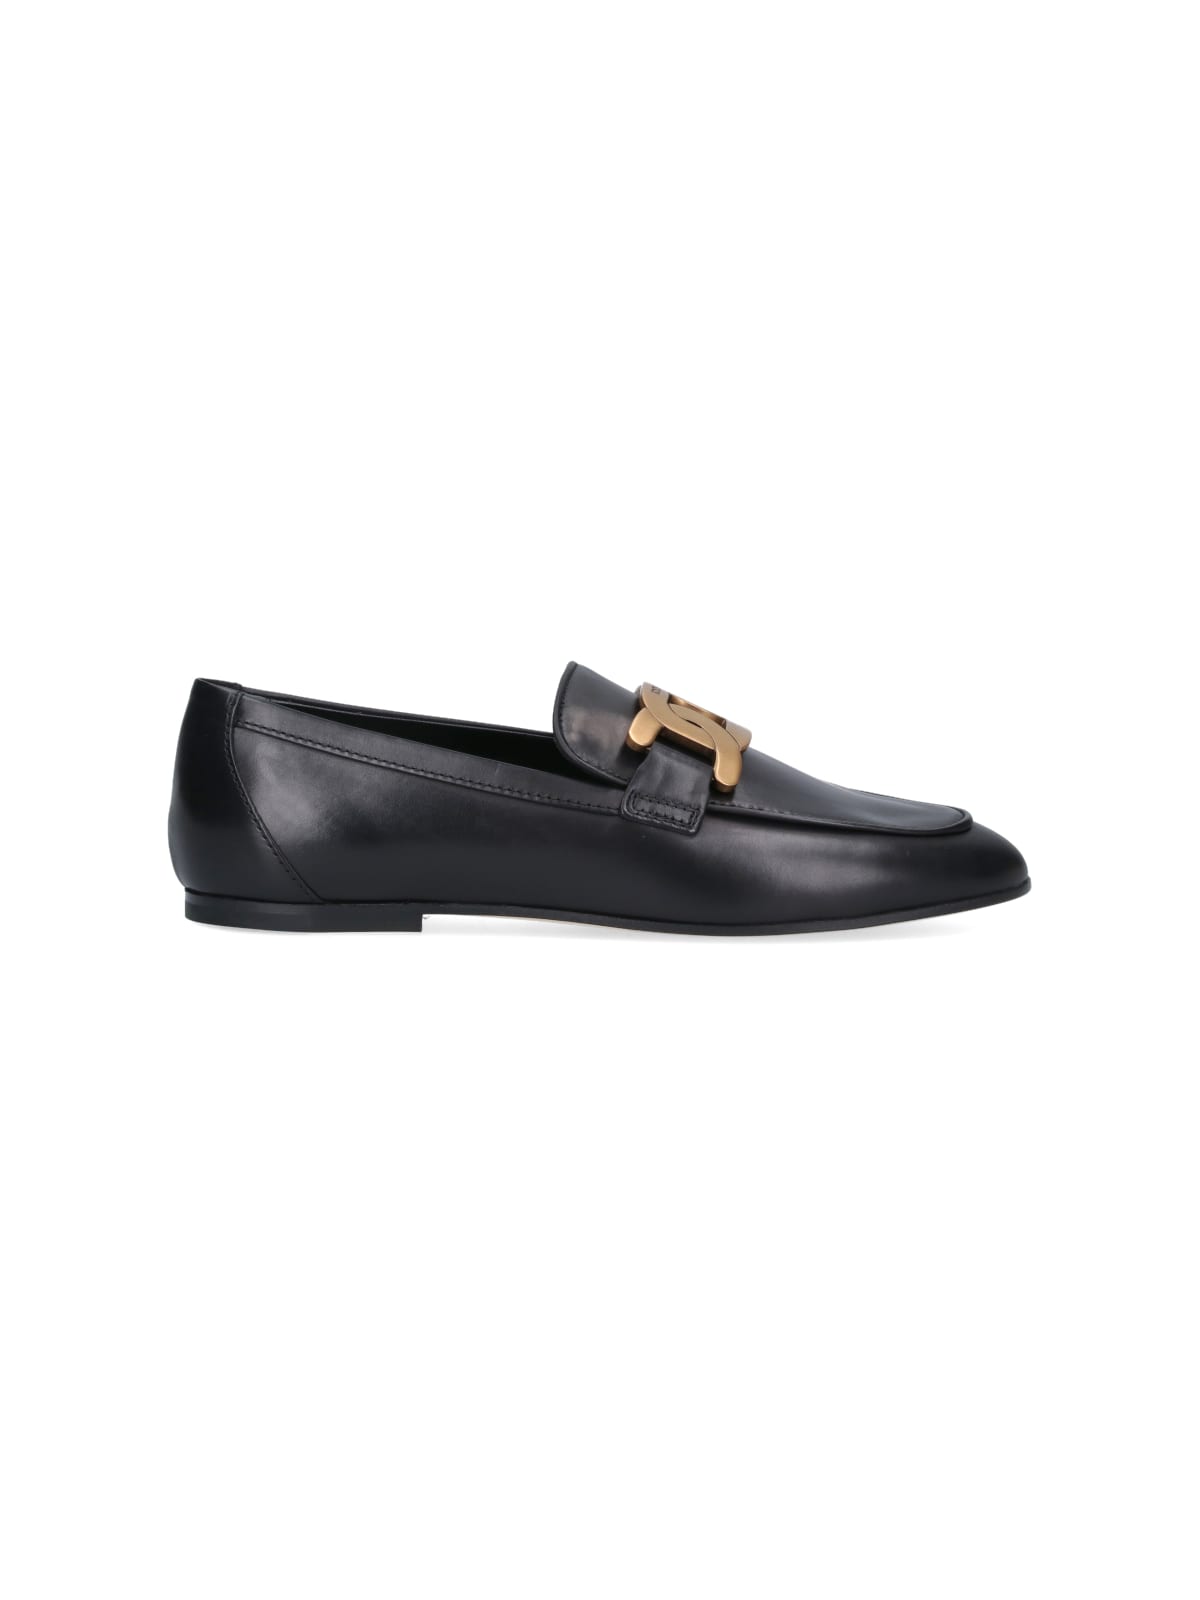 TOD'S BUCKLE LOAFERS